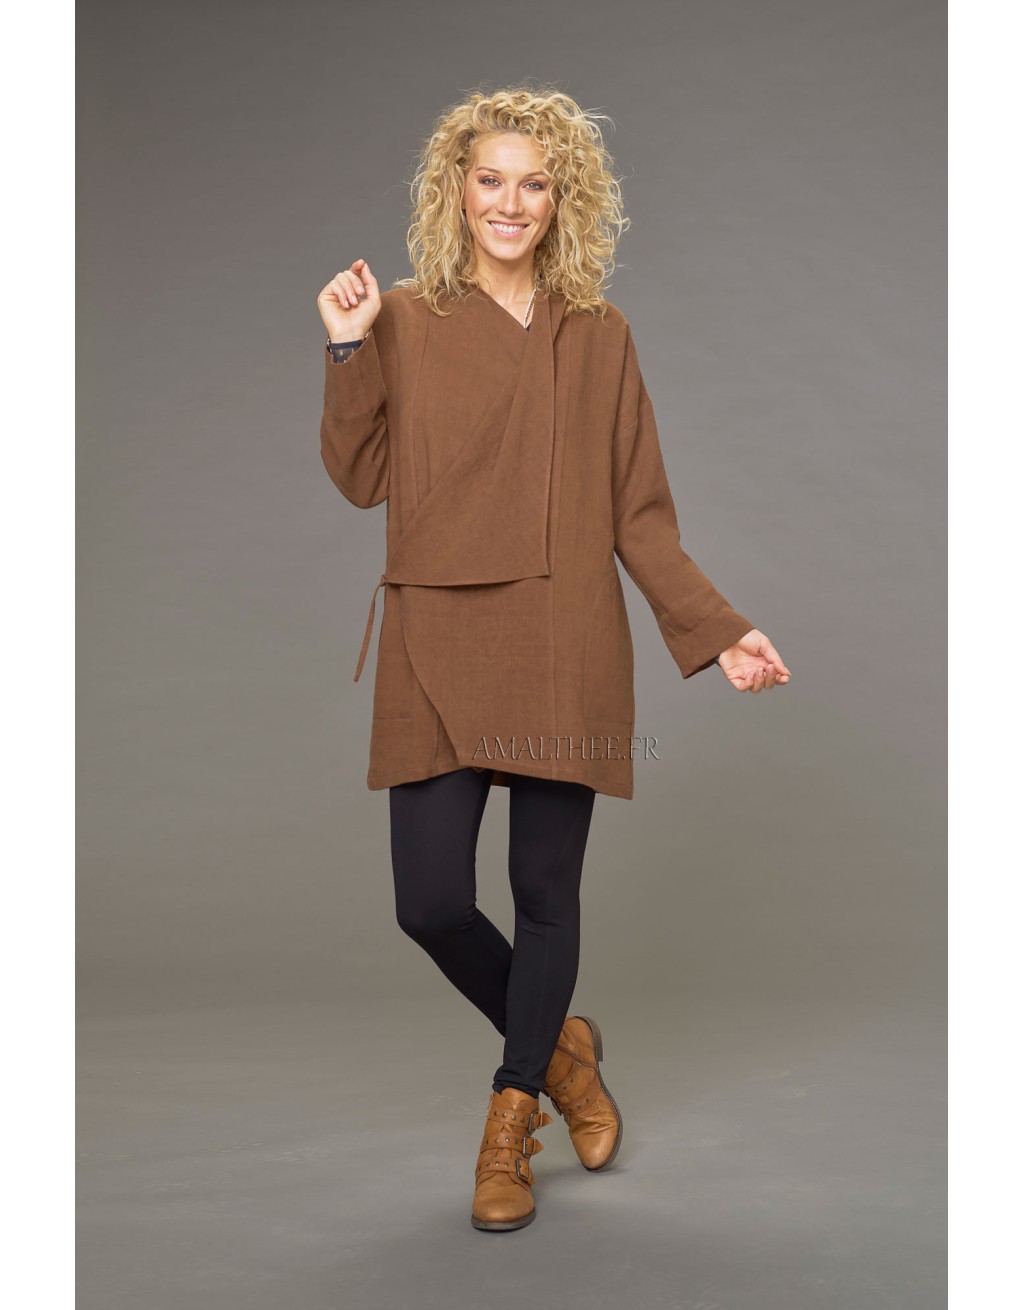 Lise coat in camel-colored wool linen with drape on the front with the unstructured Alaya tunic